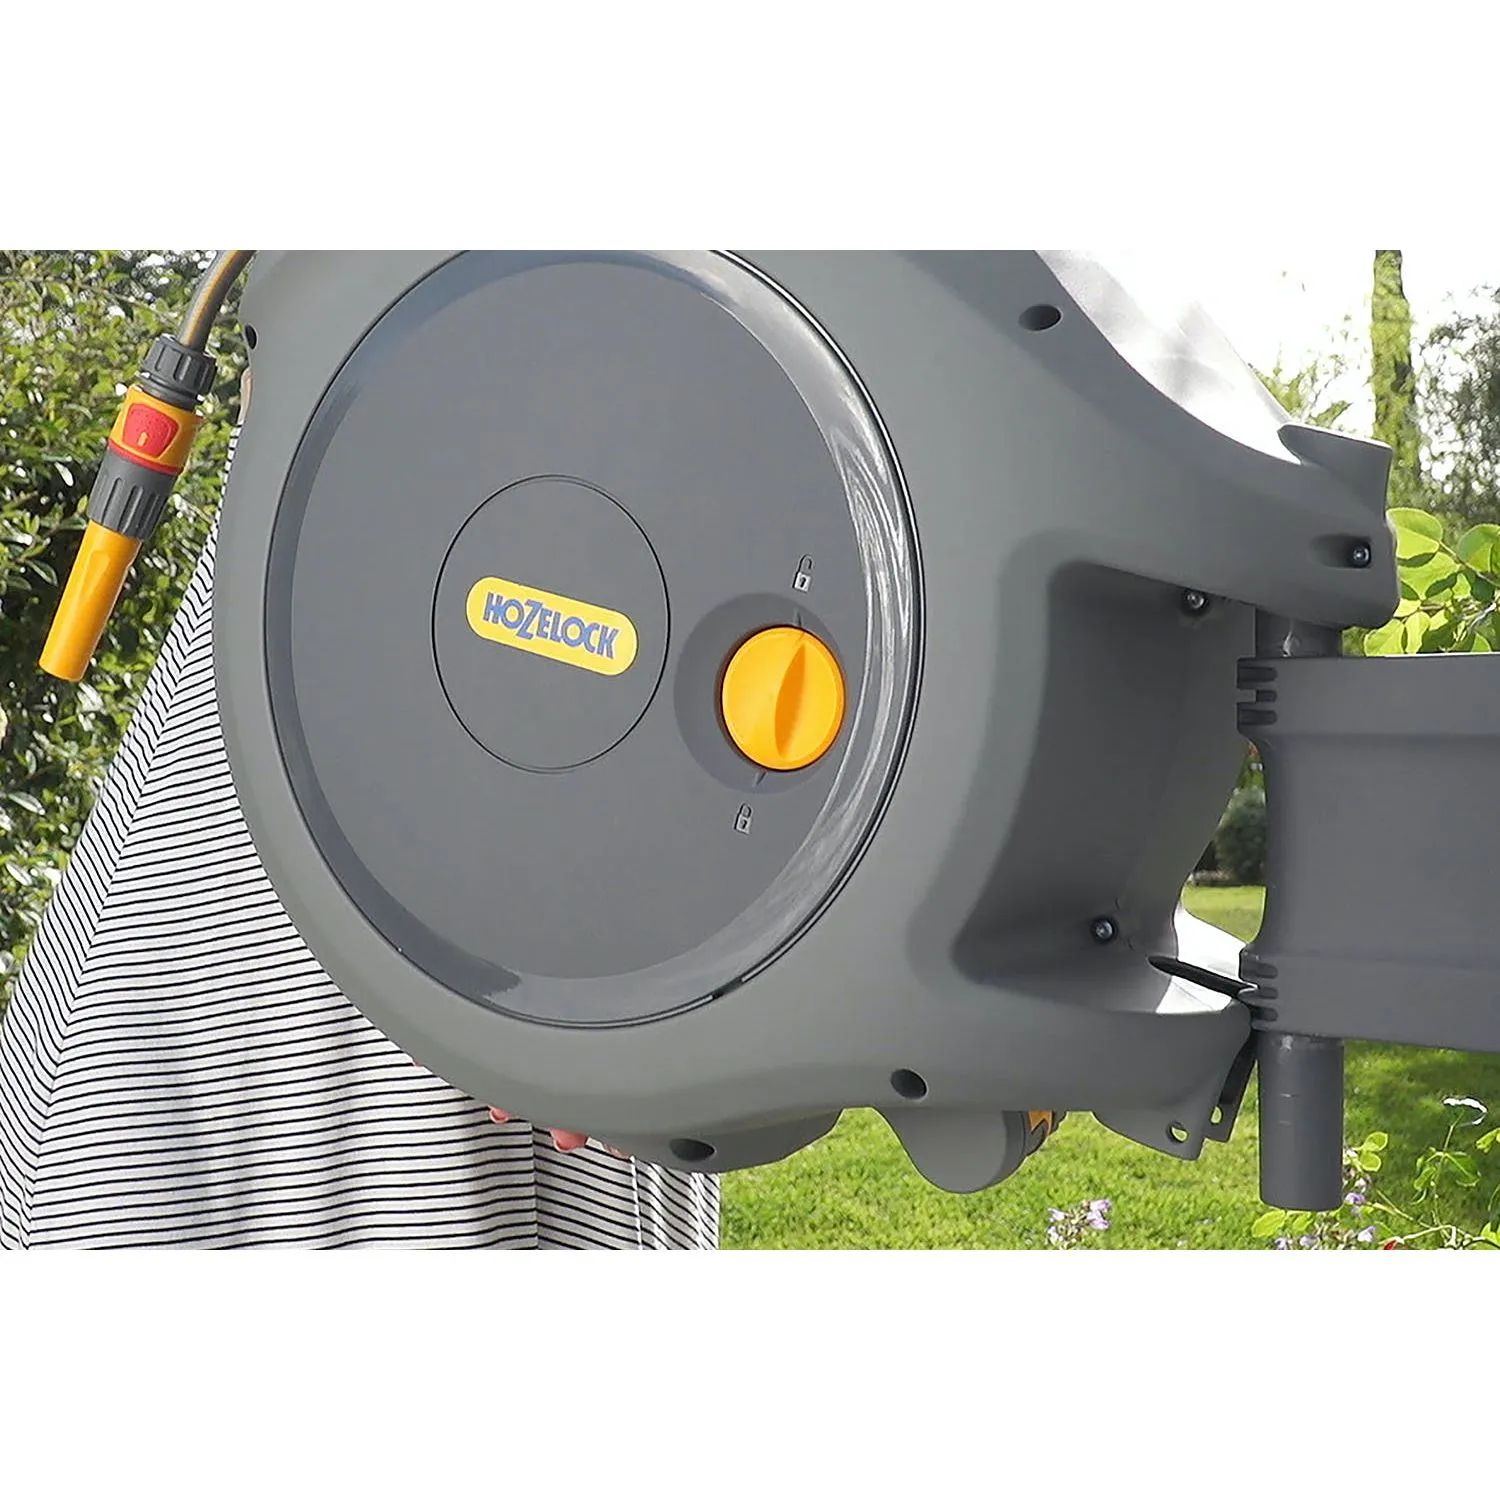 Hozelock 40m Auto Reel with Hose at Clarkes of Cavan - Delivery Nationwide.